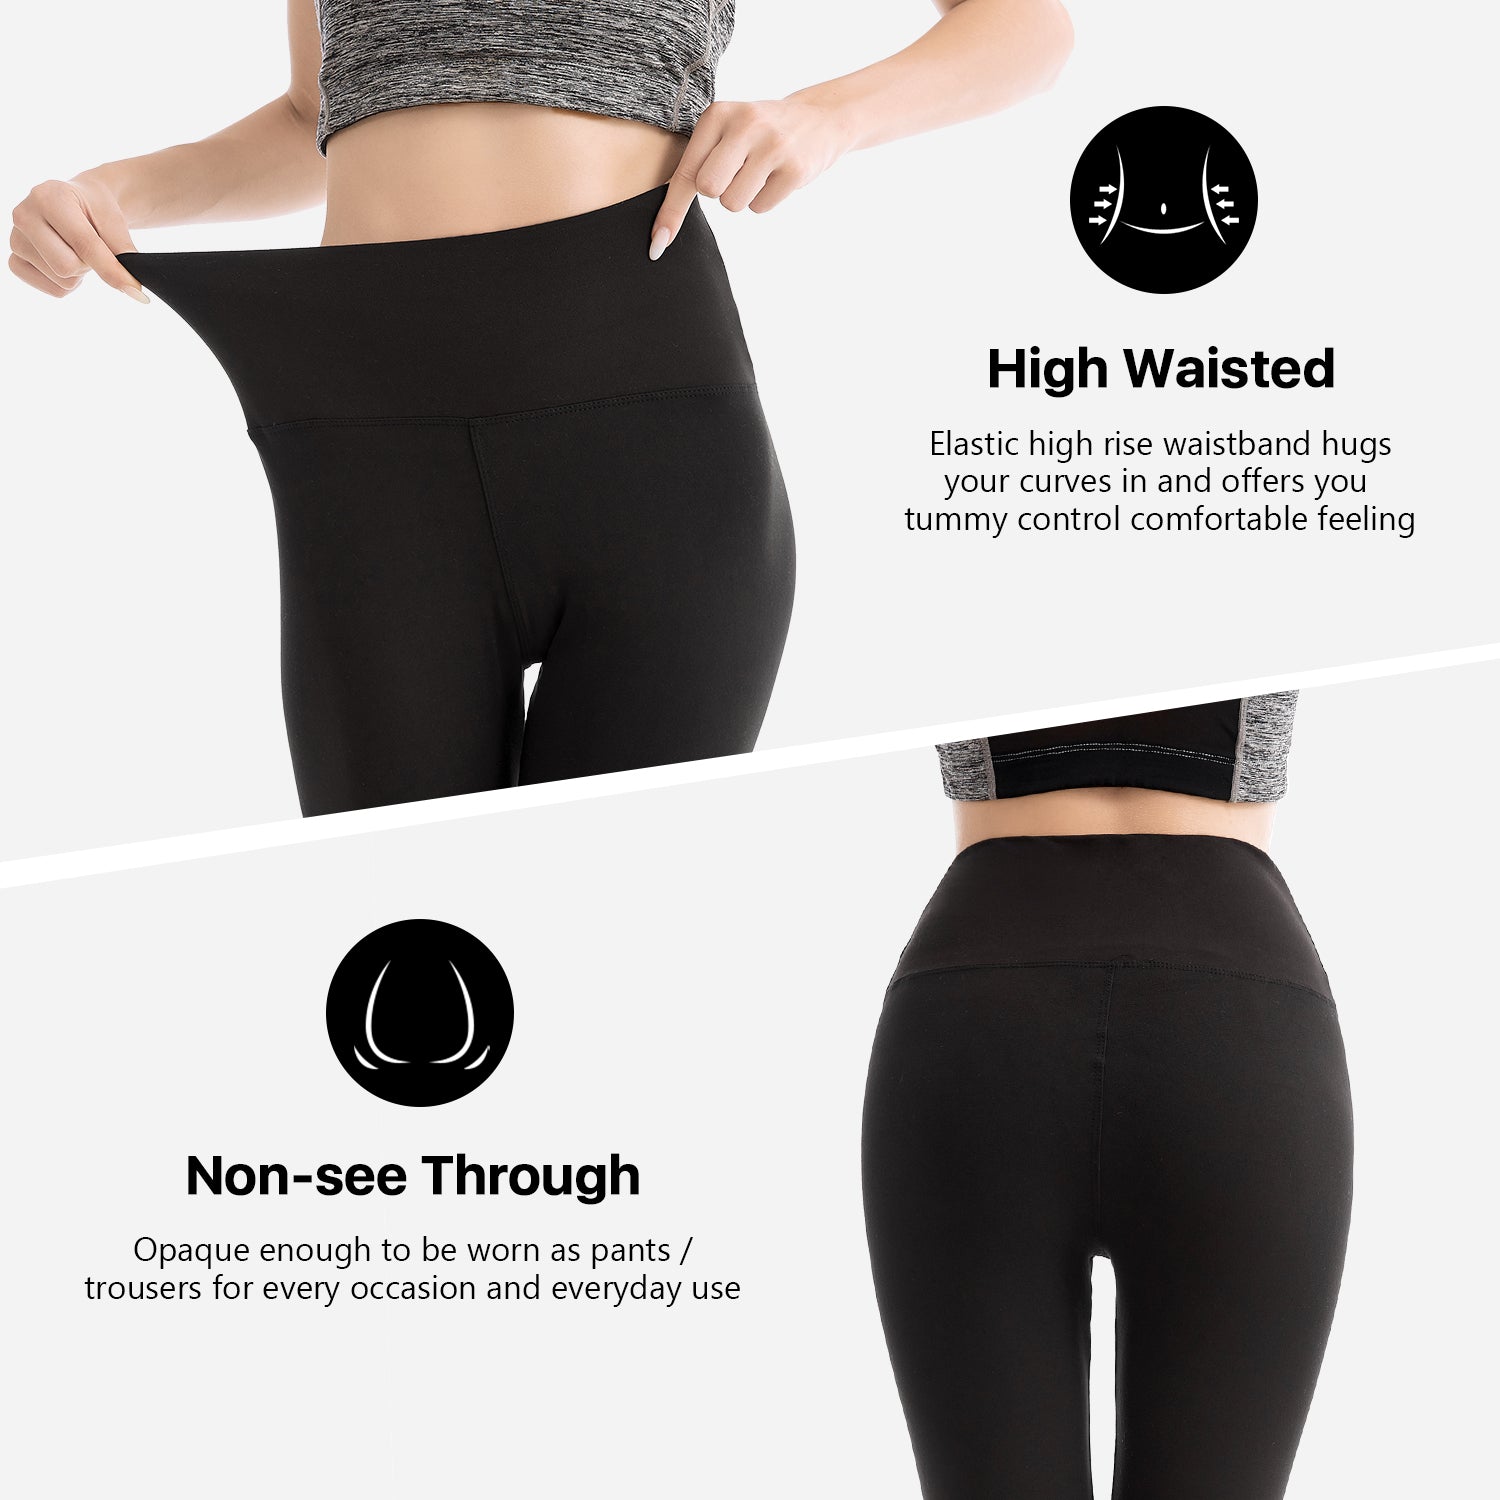 Women's Everyday Stretchy Pants